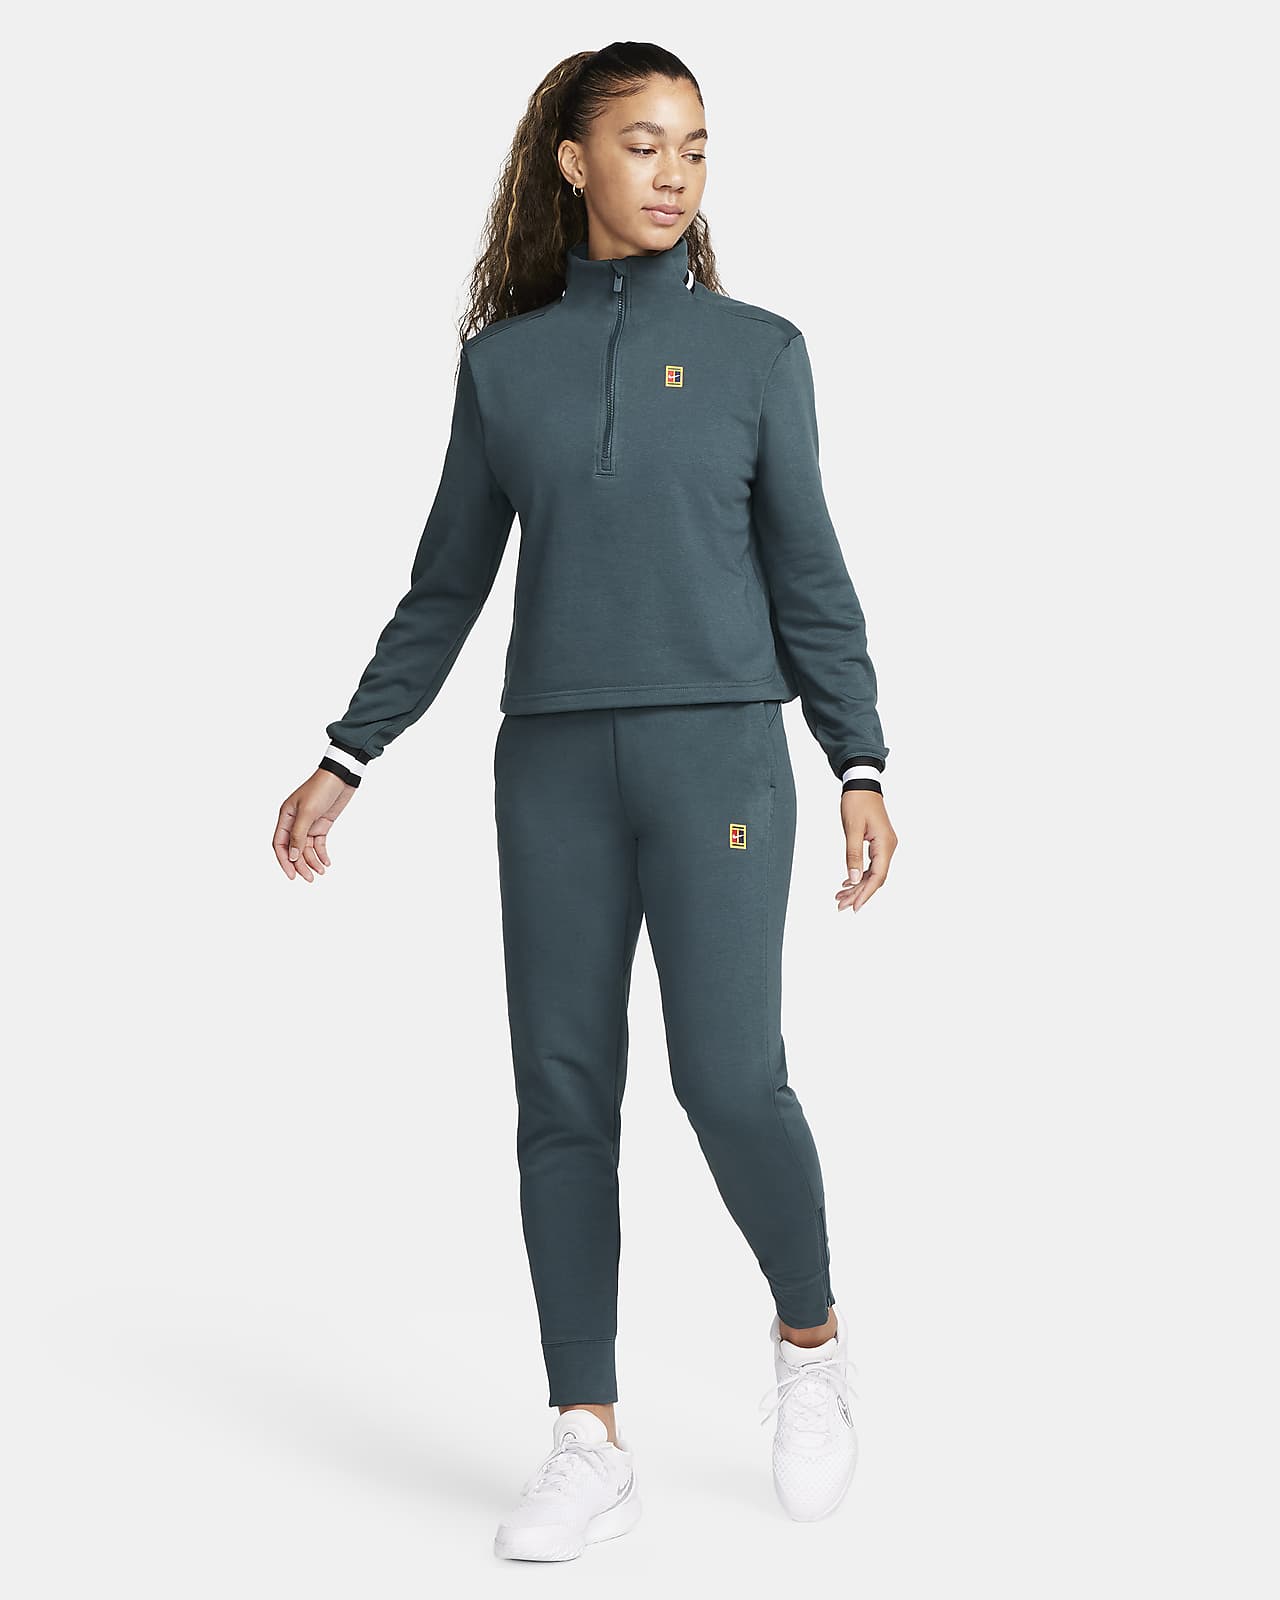 The best tracksuit bottoms by Nike. Nike CA